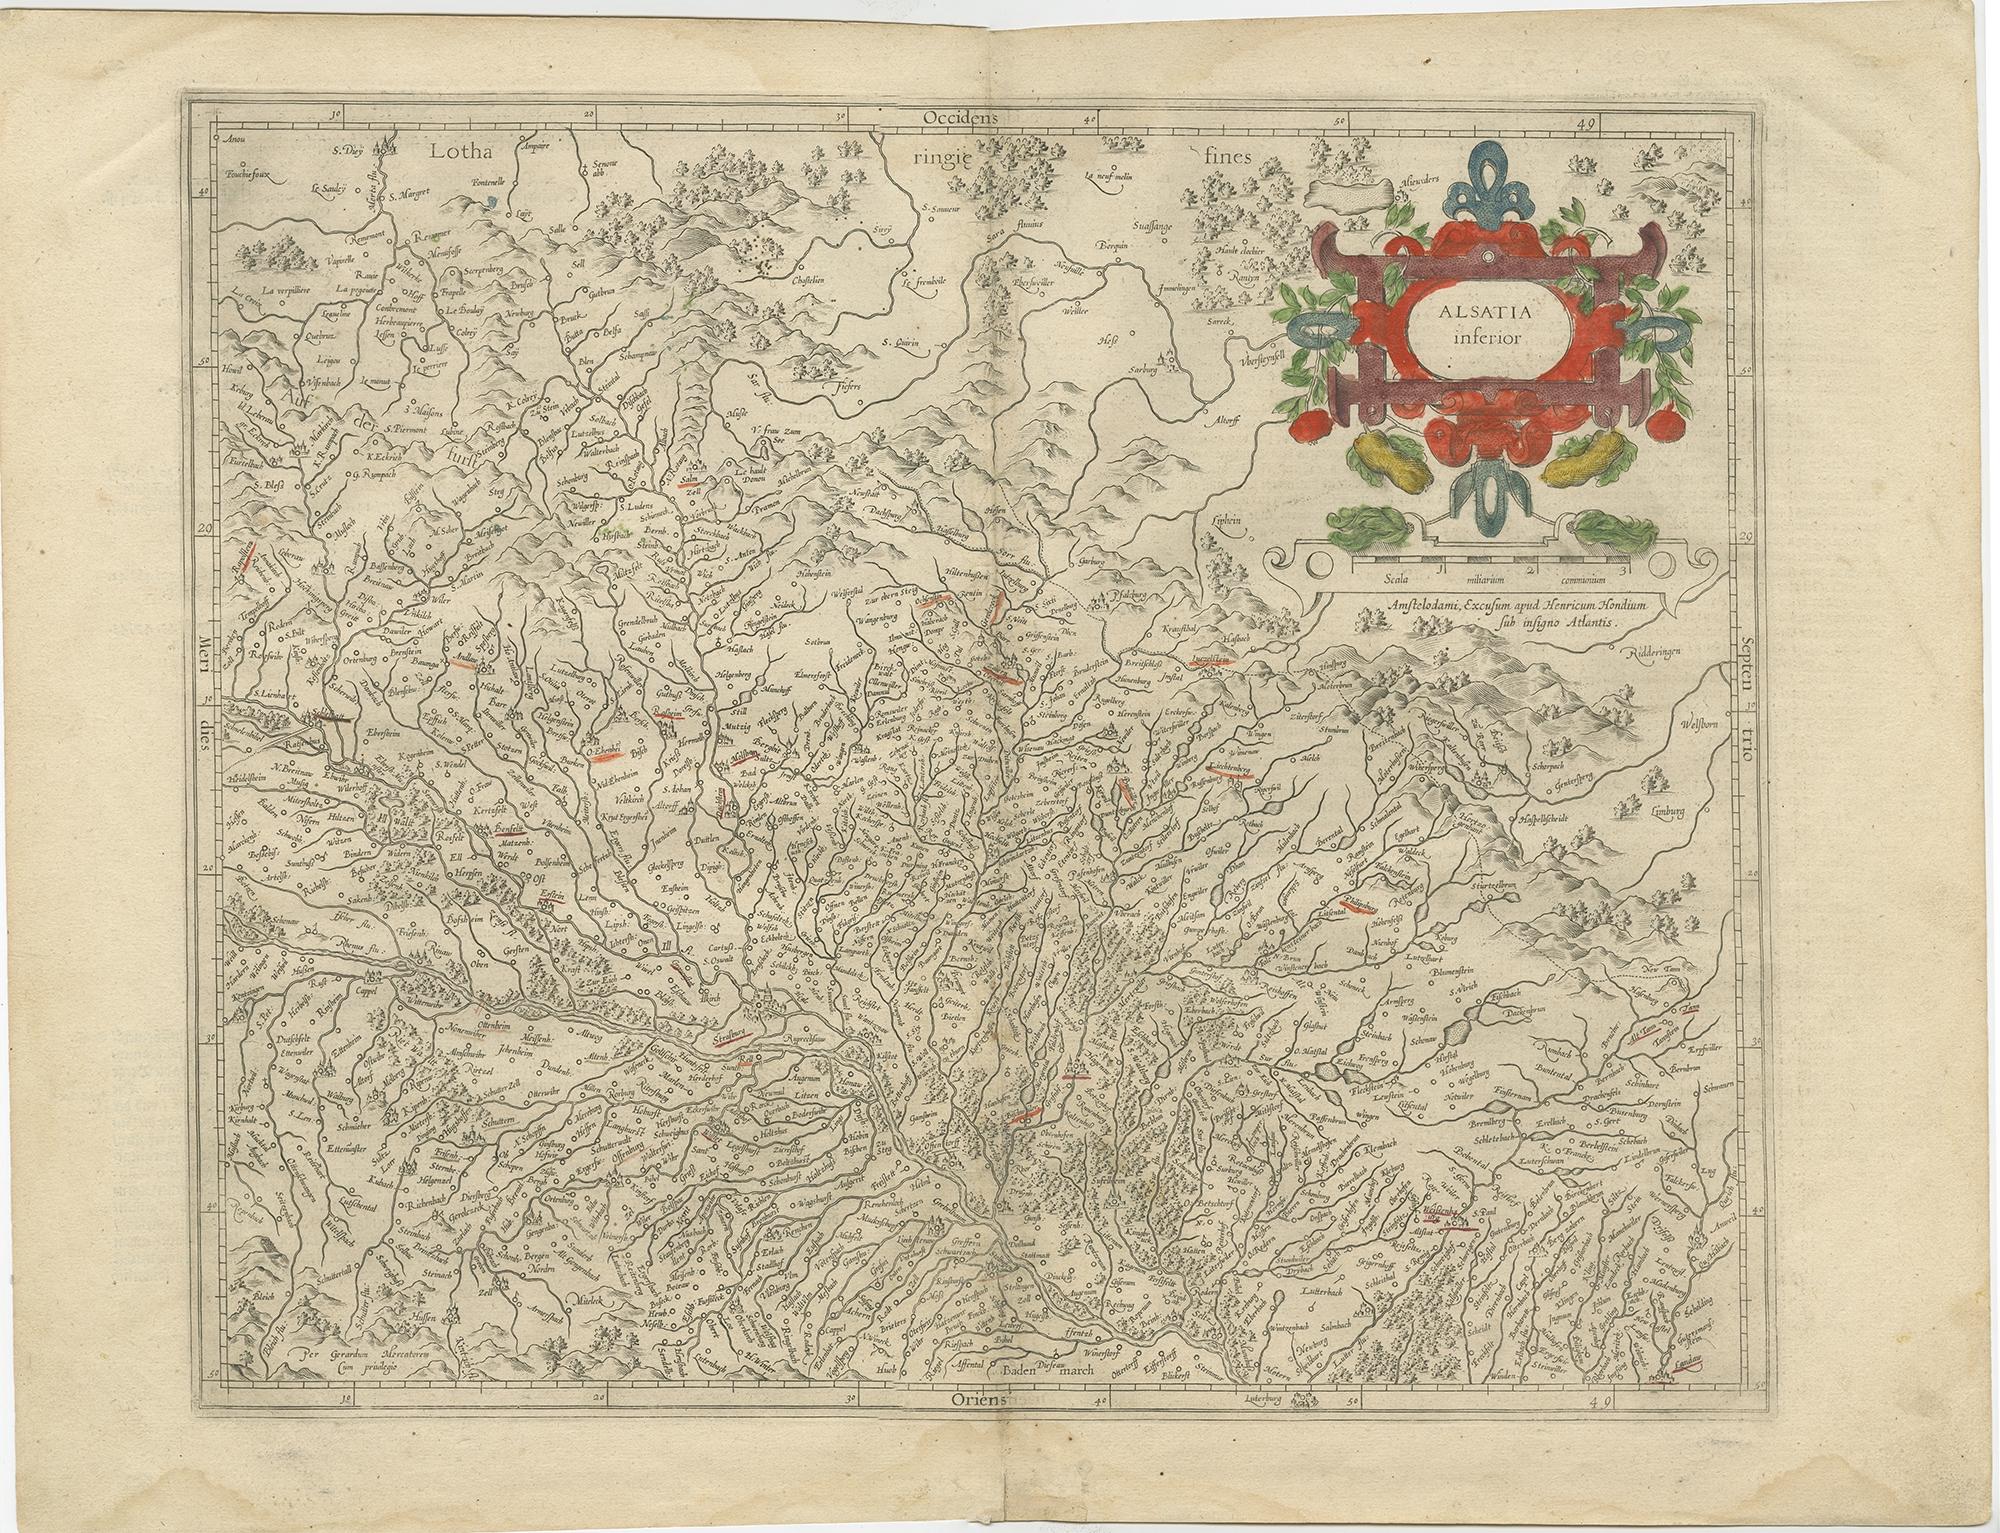 Antique map titled 'Alsatia Inferior'. Original antique map of the northern Alsace (Elzas) region of France. The map is centered on the course of the Rhine River, with Strasbourg at the top.

Artists and Engravers: Published by H. Hondius. Henricus